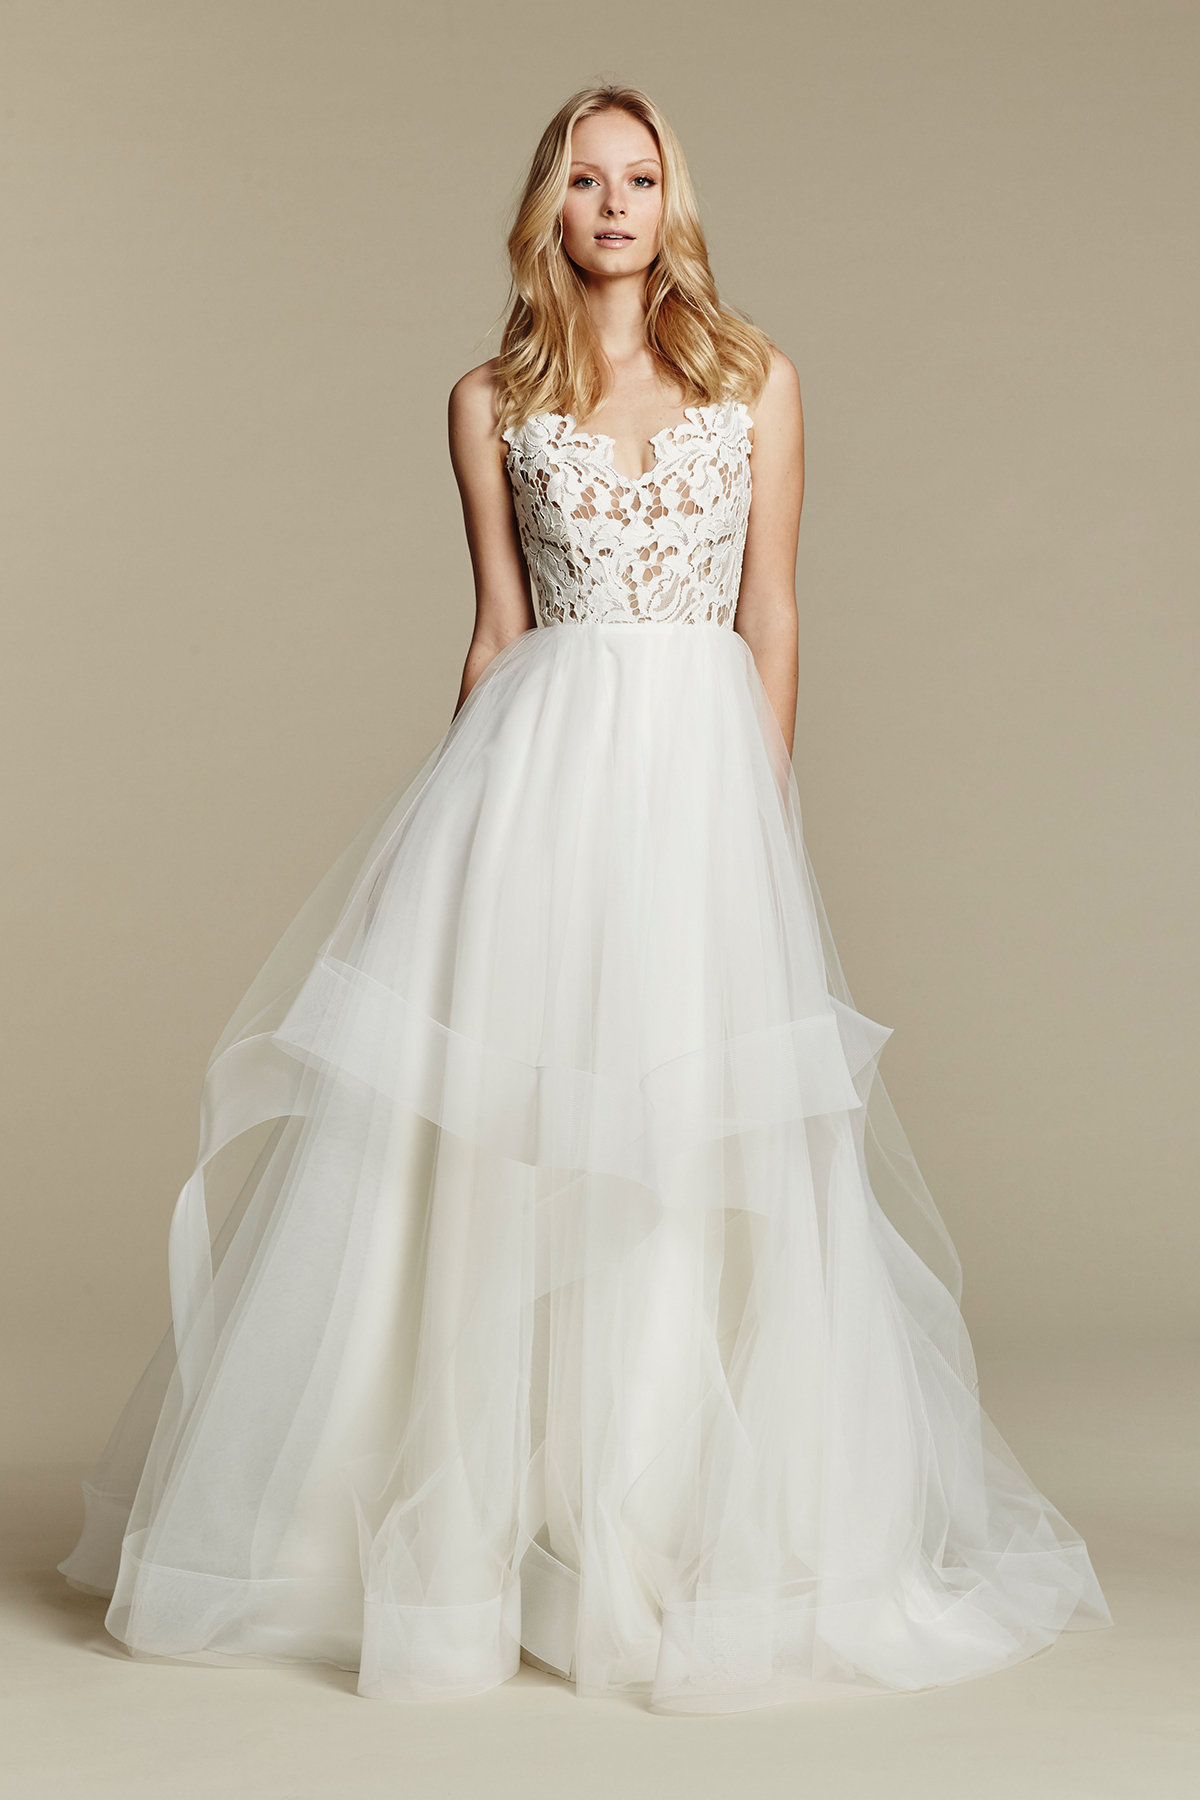 blush-hayley-paige-bridal-lace-tulle-ball-gown-scalloped-v-neck-strap-tiered-tulle-horsehair-trim-1600_x4.jpg